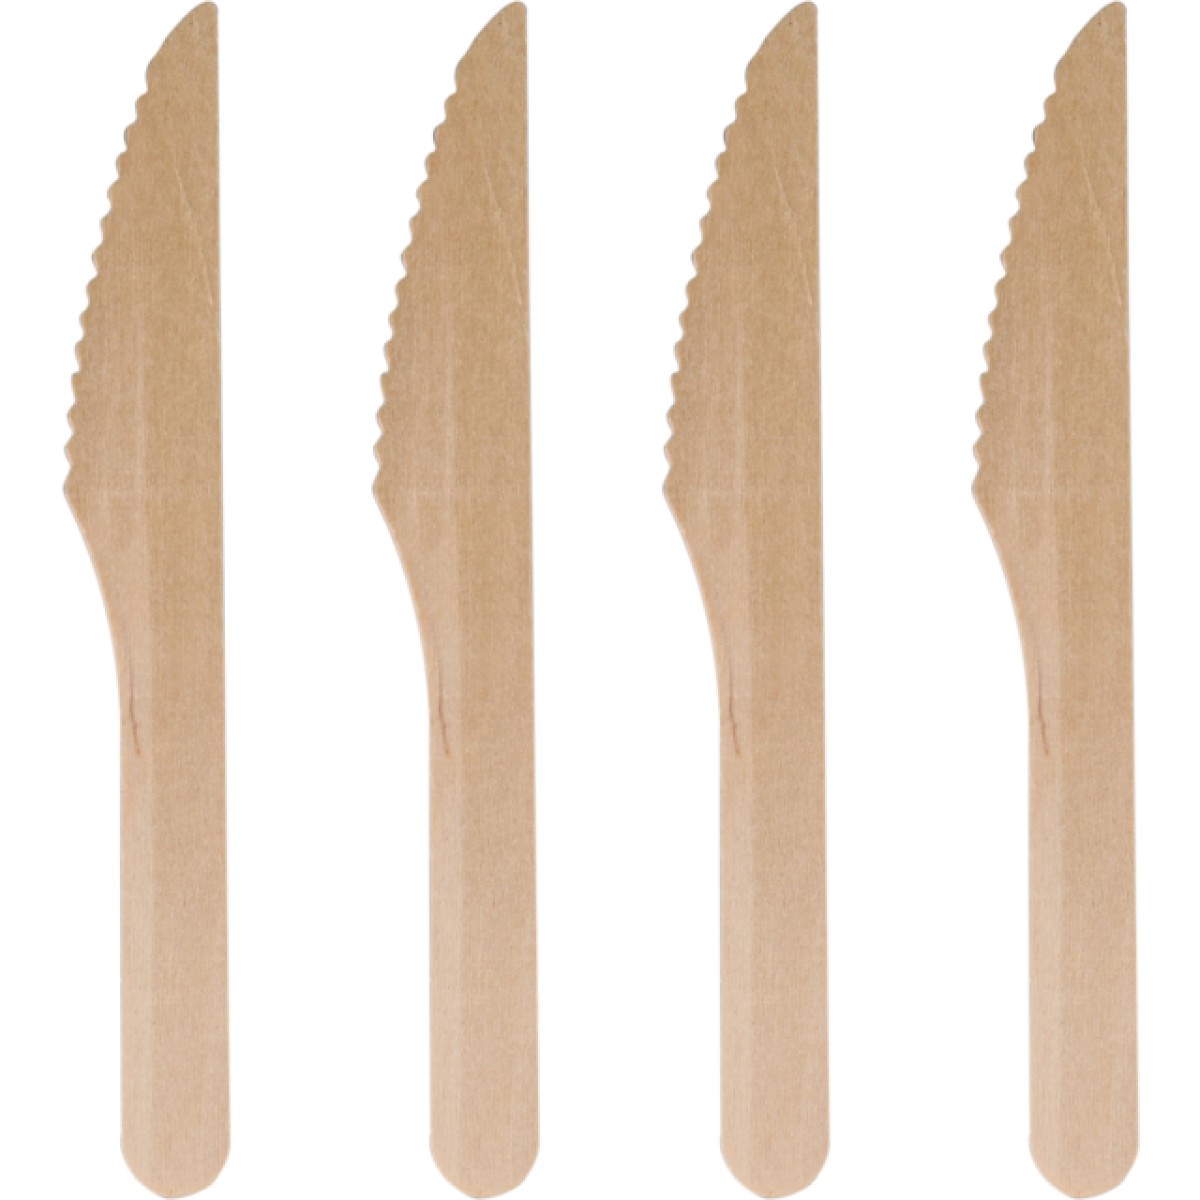 Mes hout natural 160mm, 480 st